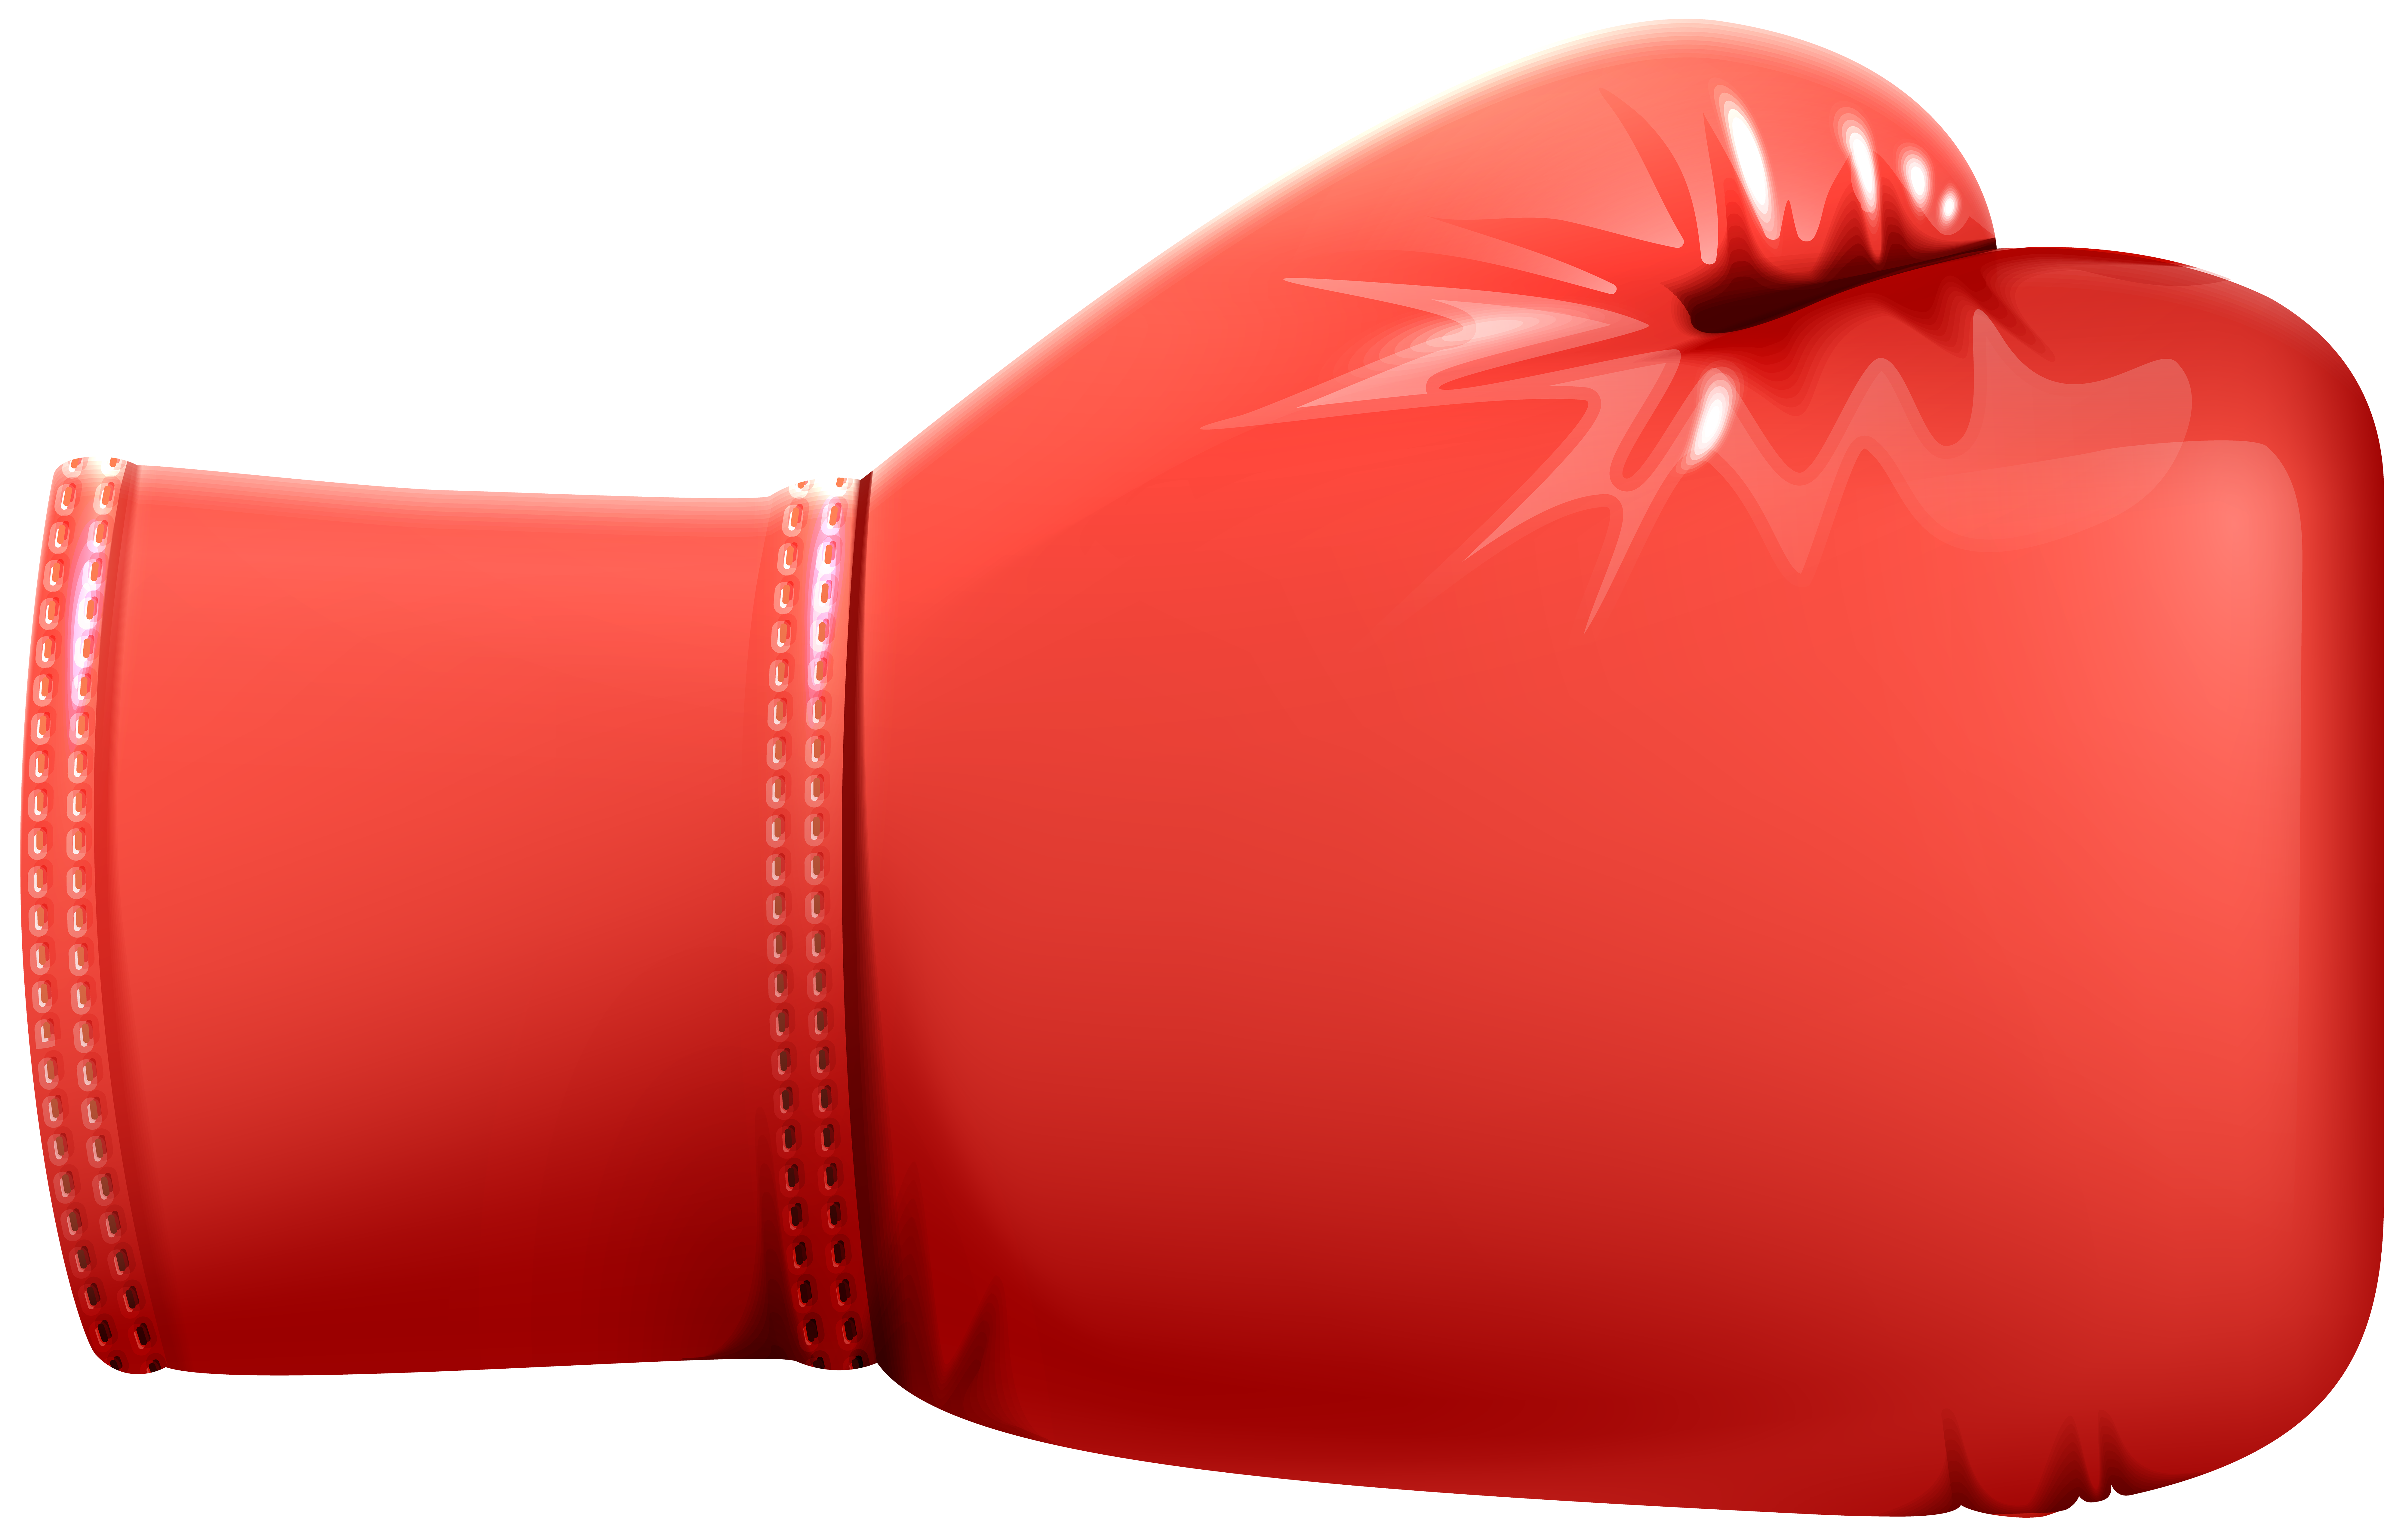 Png clip art gallery. Glove clipart boxing